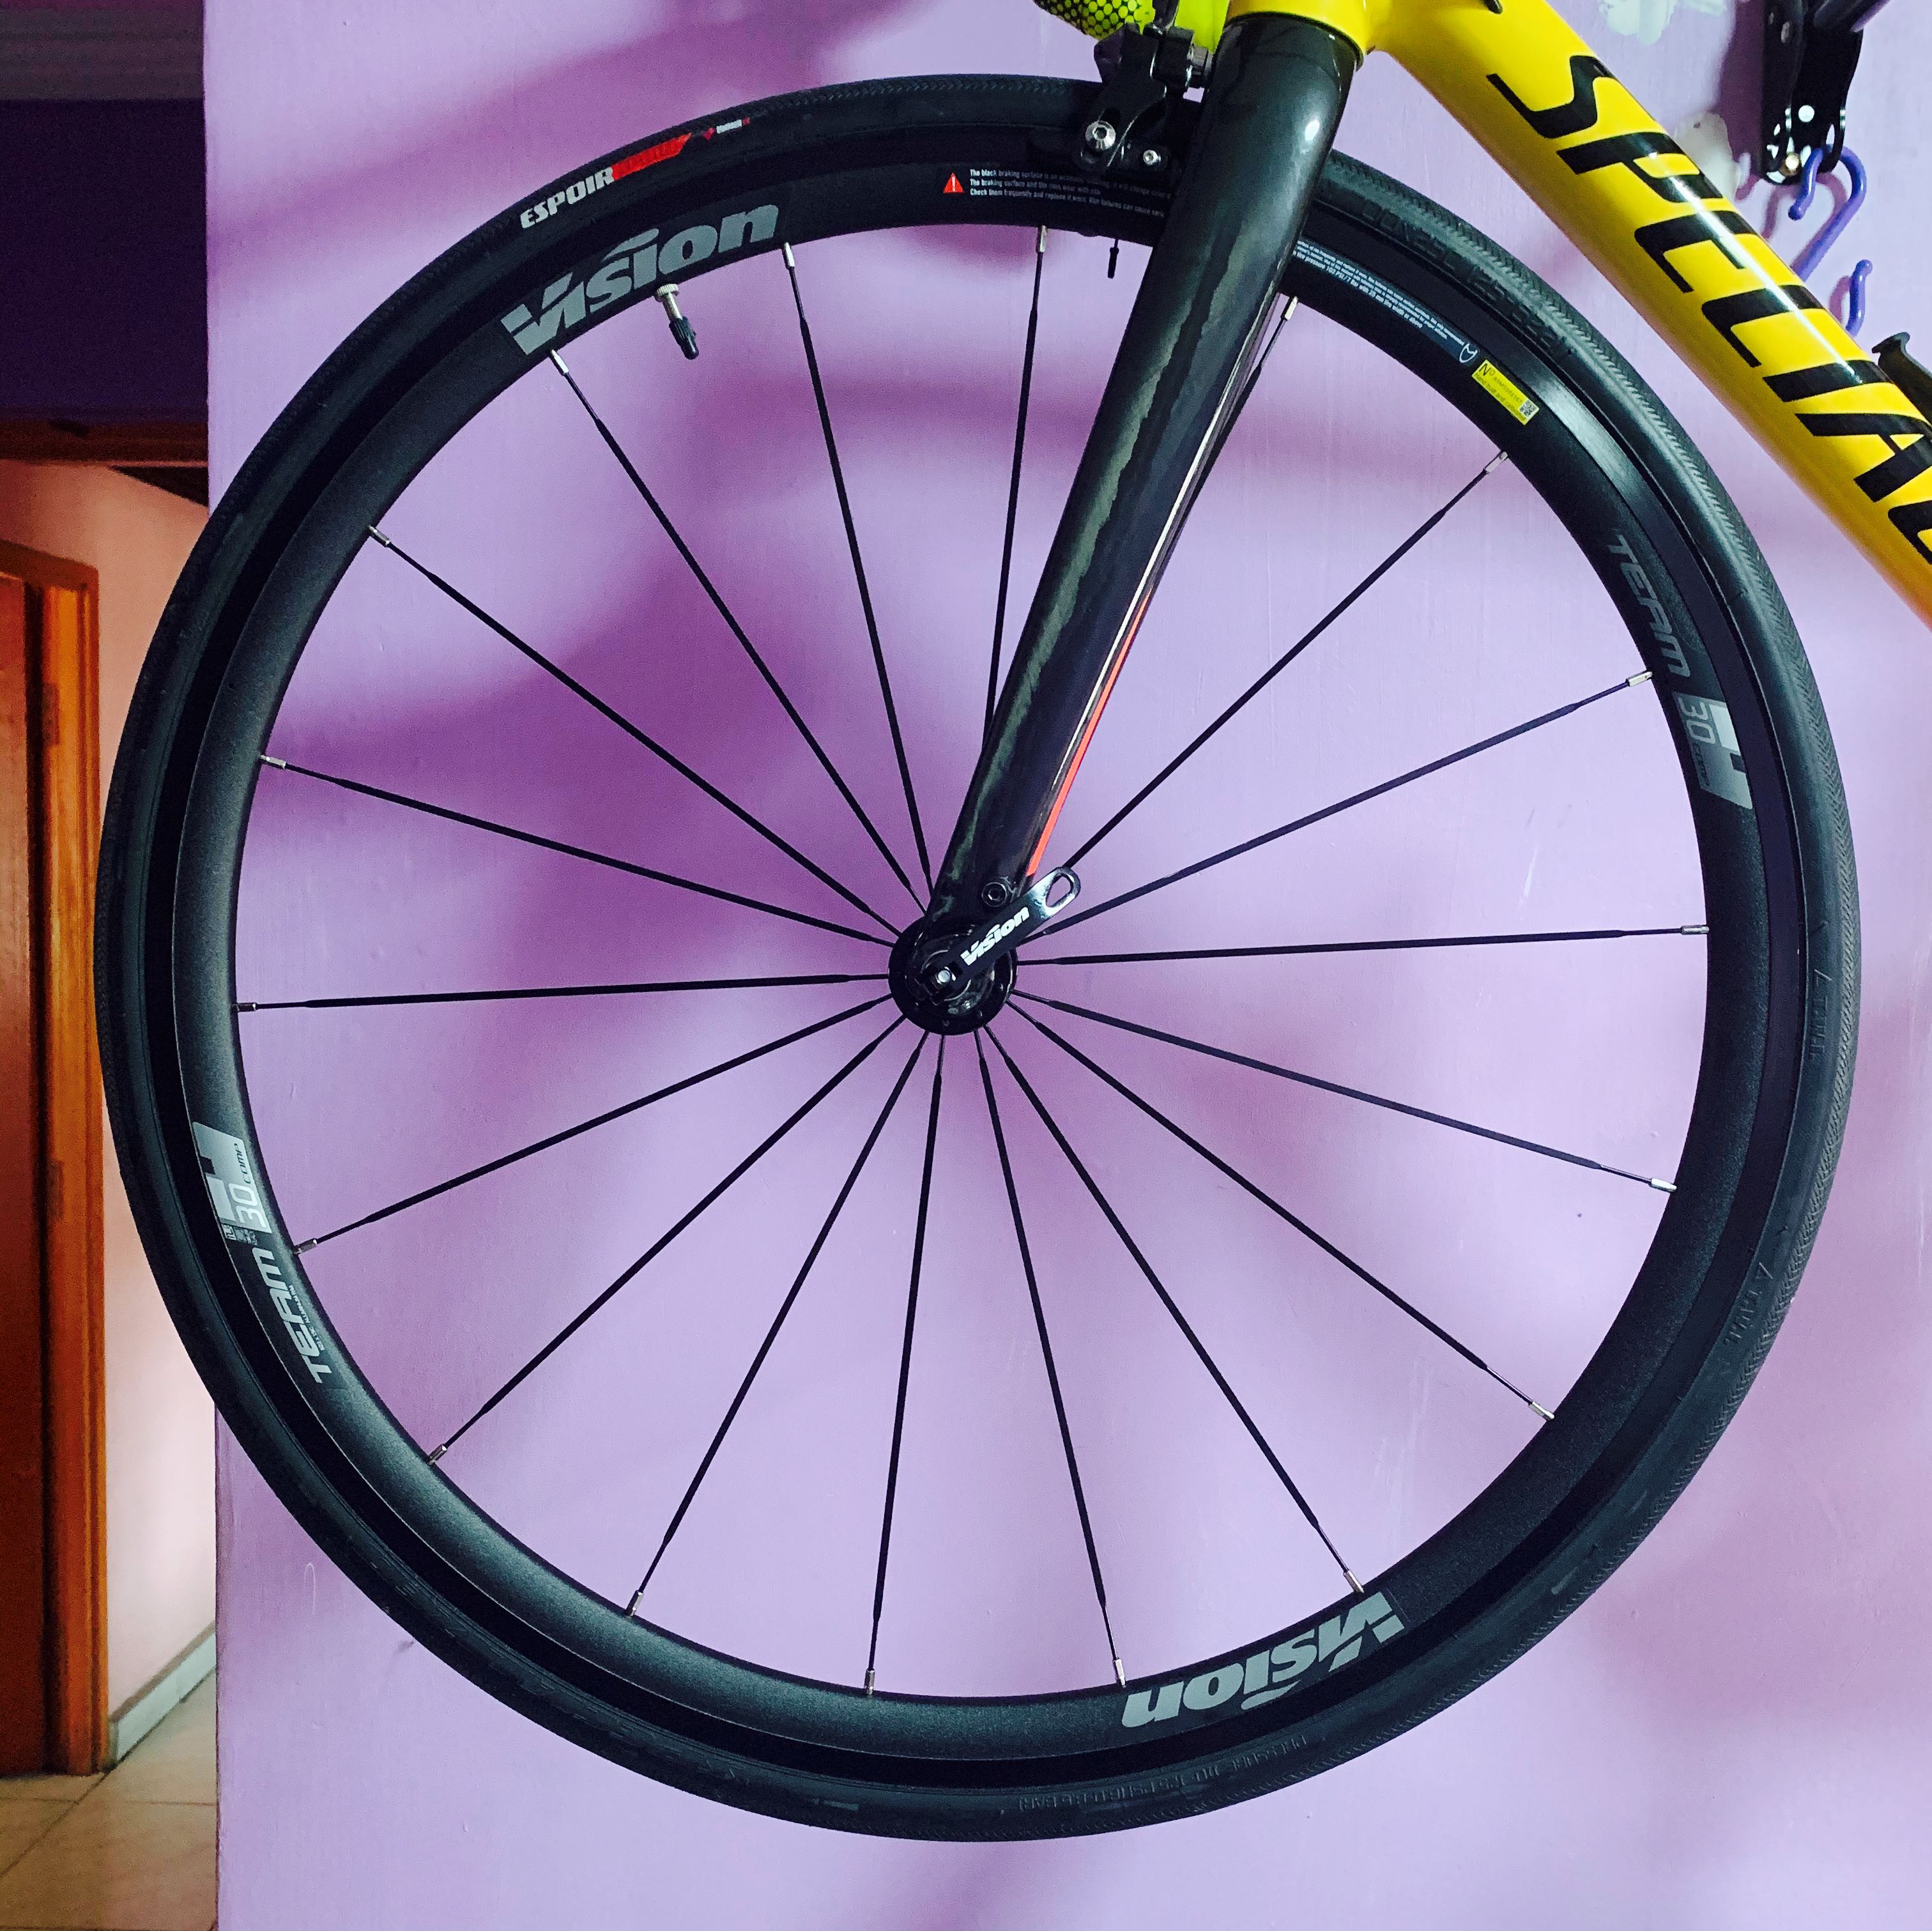 Vision Team 30 Comp Clincher Wheelset, Sports Equipment, Bicycles & Parts, Bicycles on Carousell